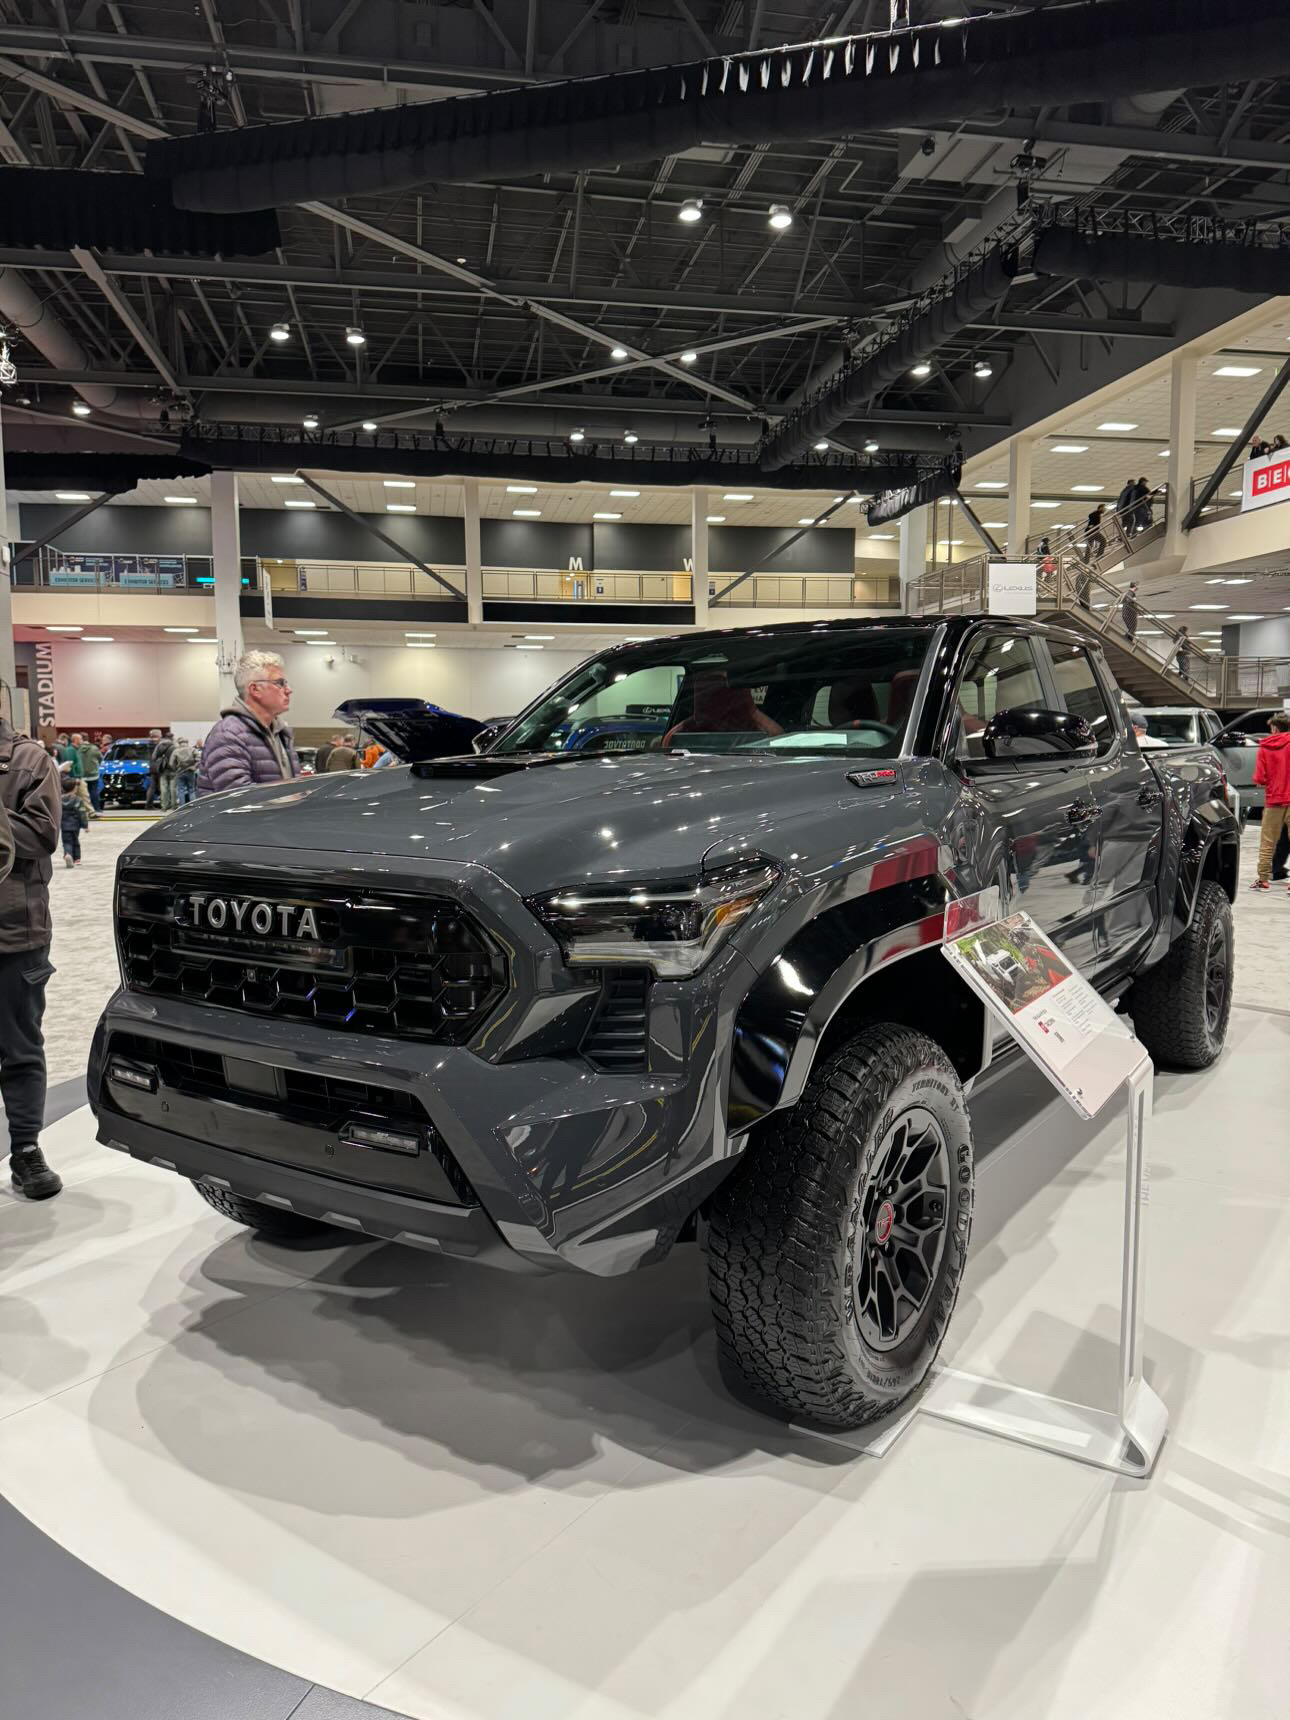 2024 Tacoma 2024 Tacoma TRD Pro in Underground Color at Seattle Auto Show EC3C08C0-808E-43FD-BB77-82D4A850D48C